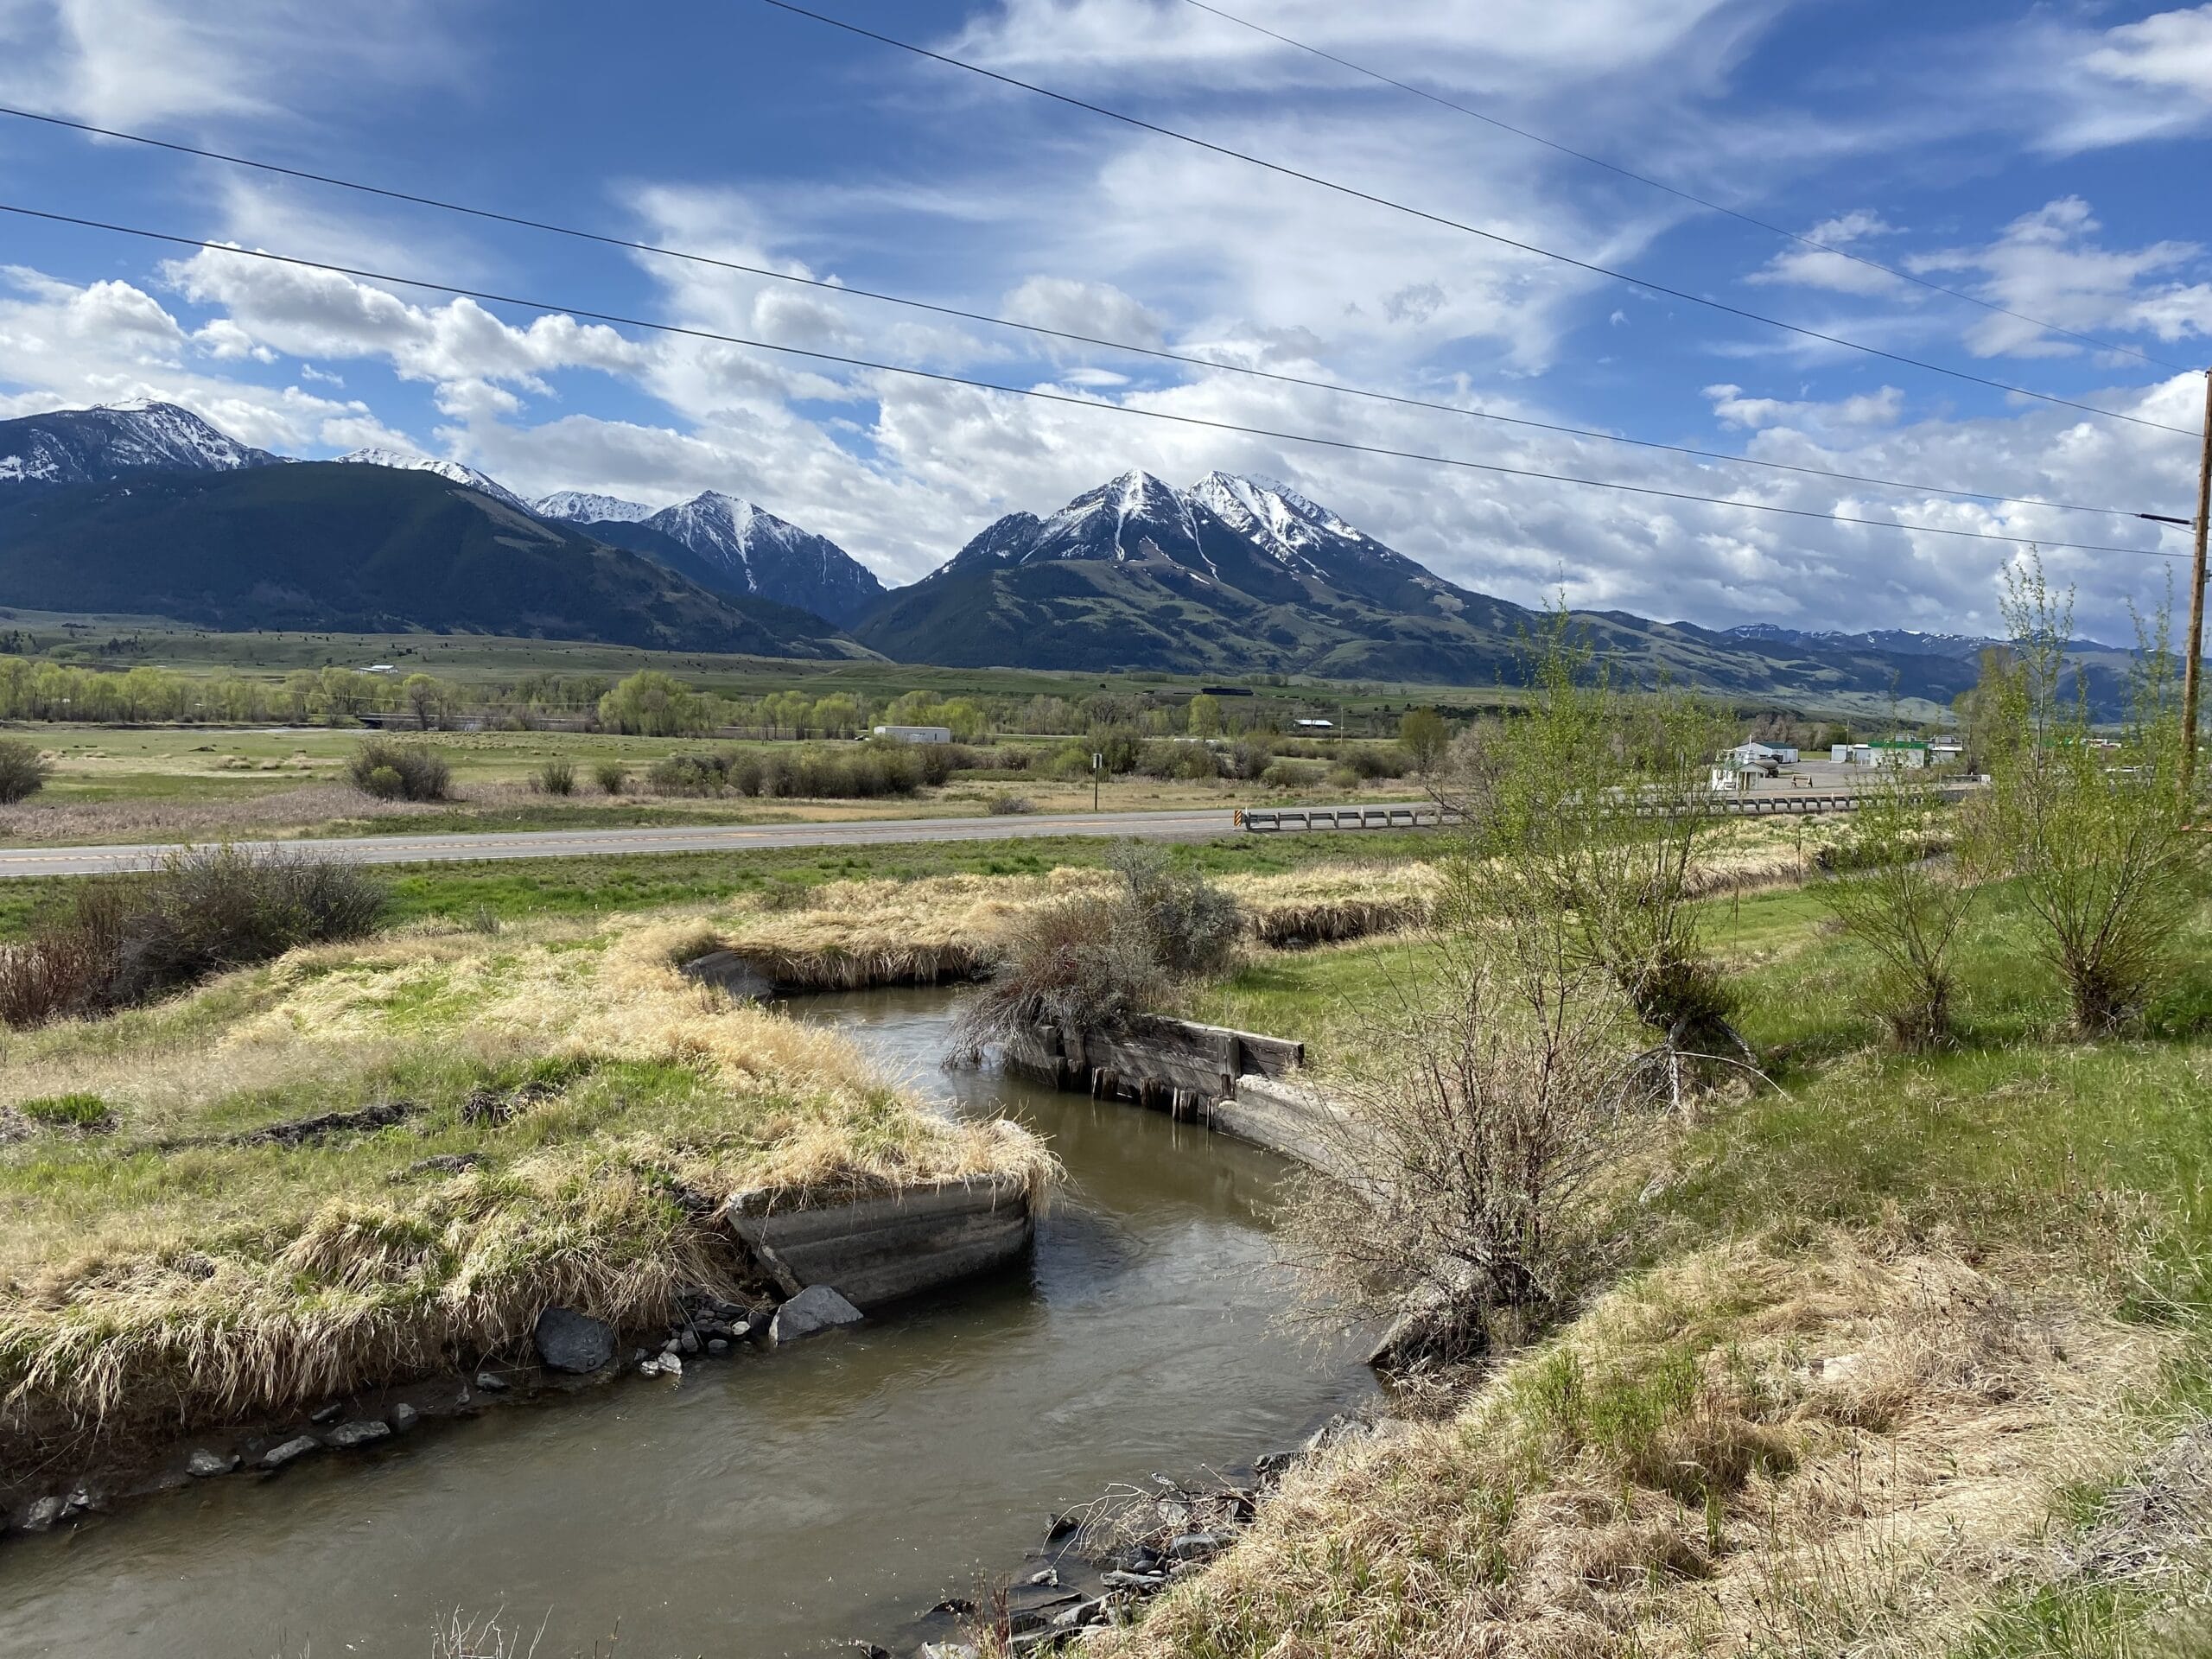 A stream in the middle of a field with mountains in the background.